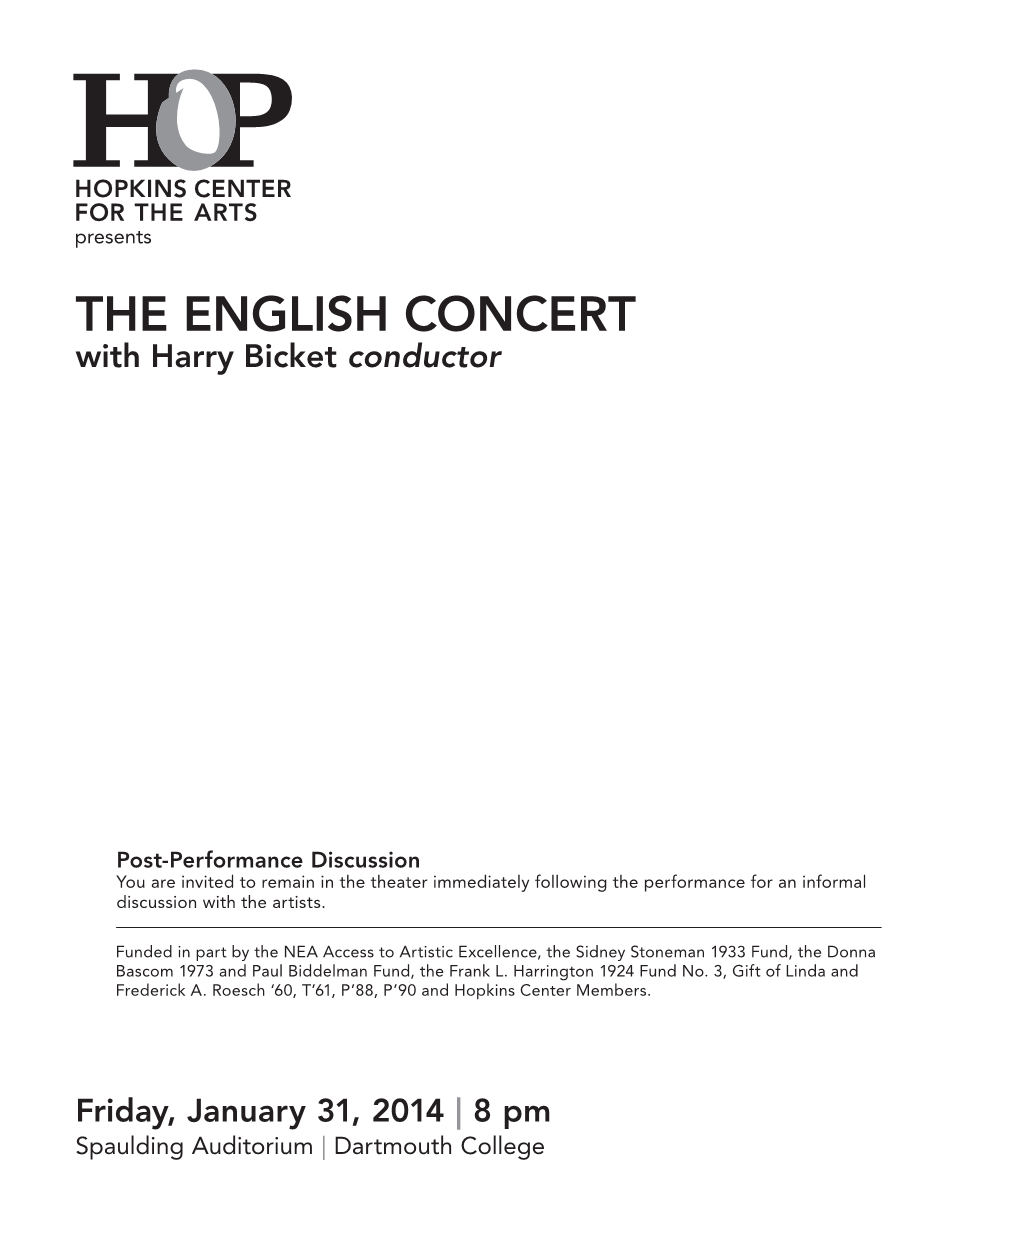 THE ENGLISH CONCERT with Harry Bicket Conductor